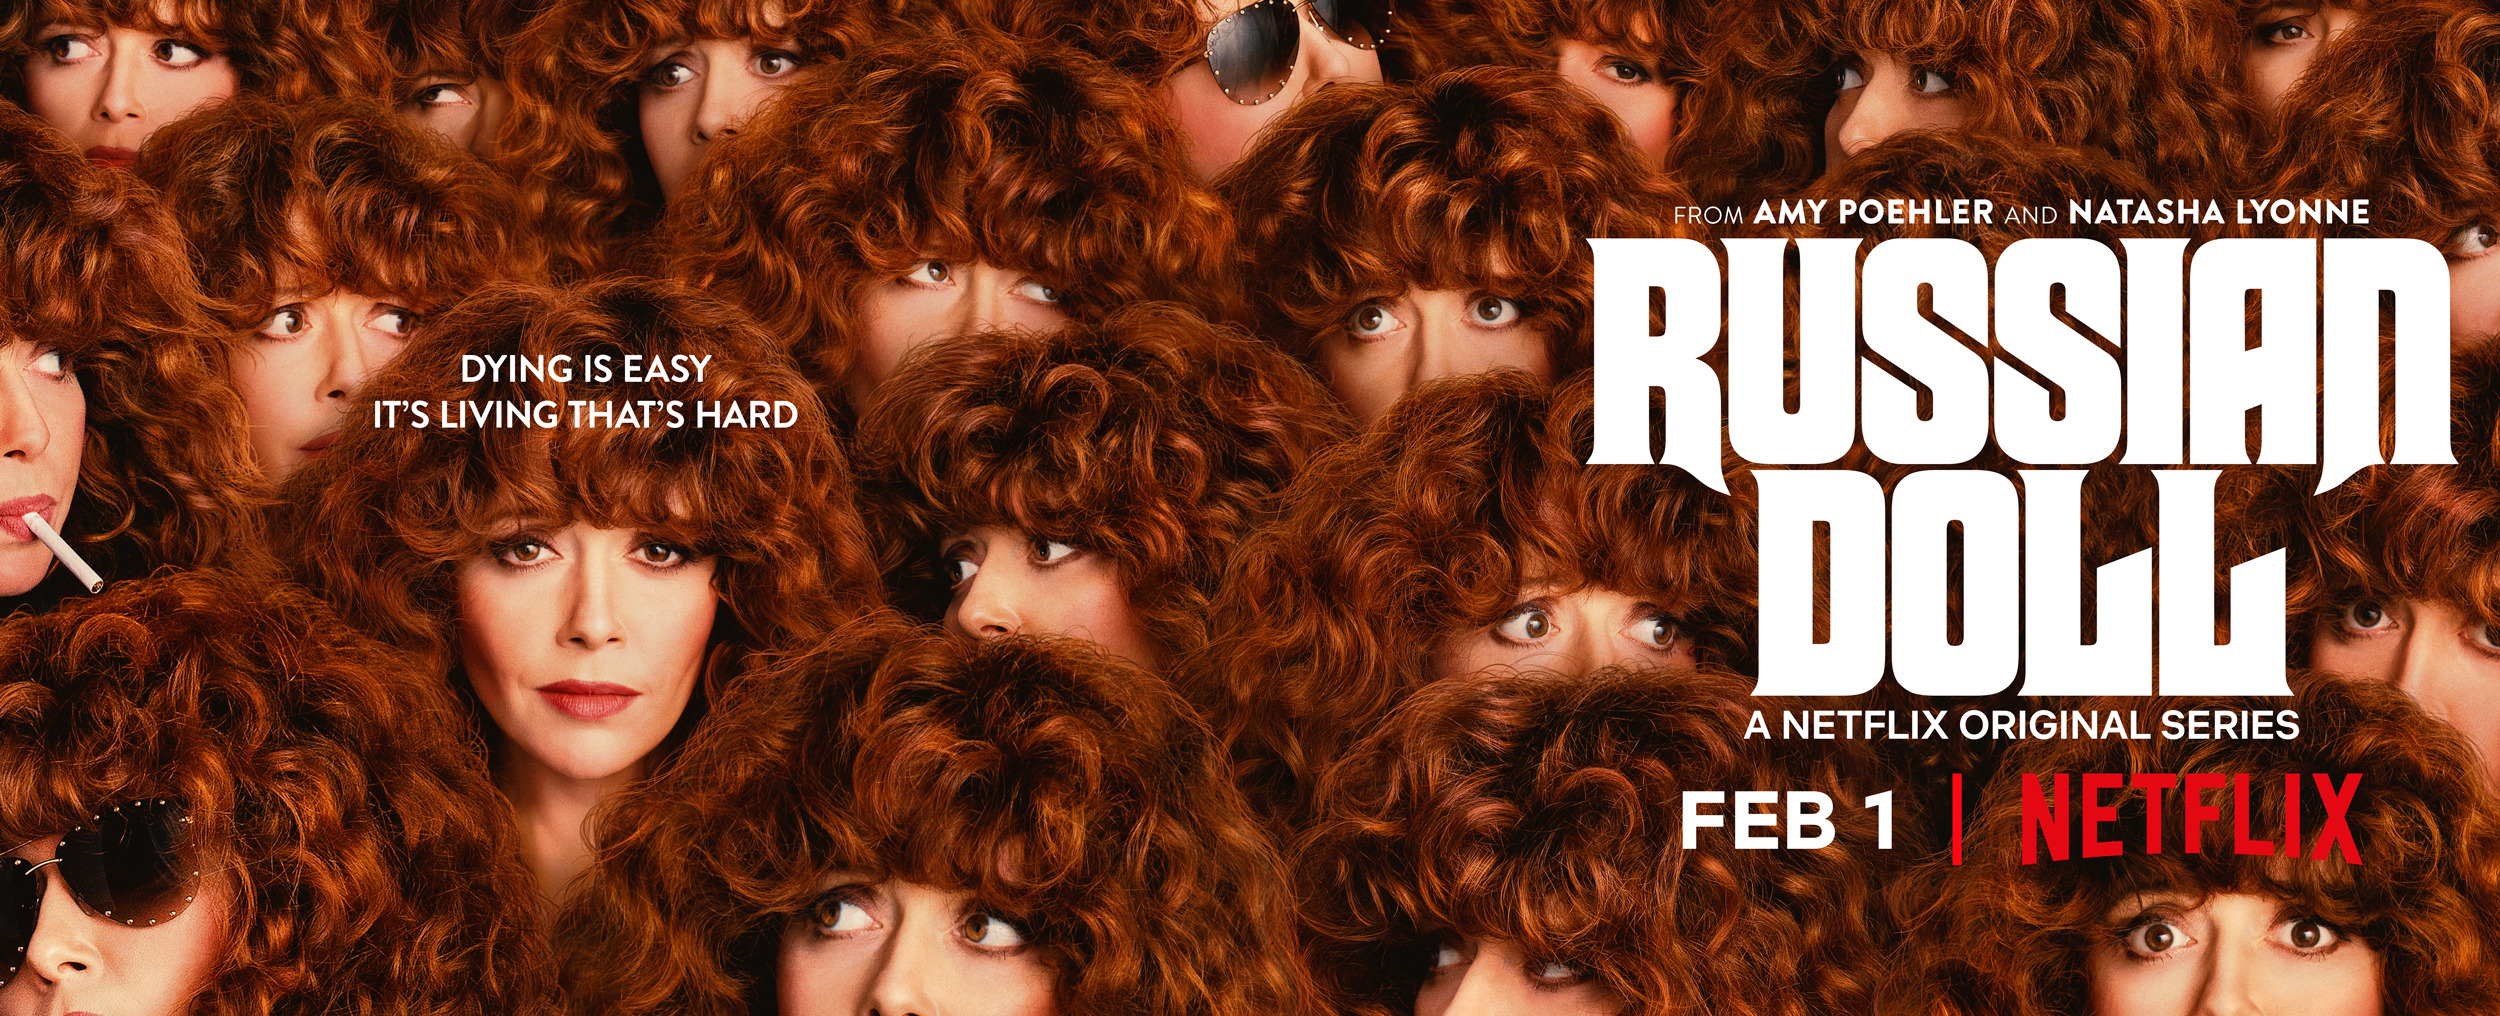 Mega Sized TV Poster Image for Russian Doll (#2 of 3)